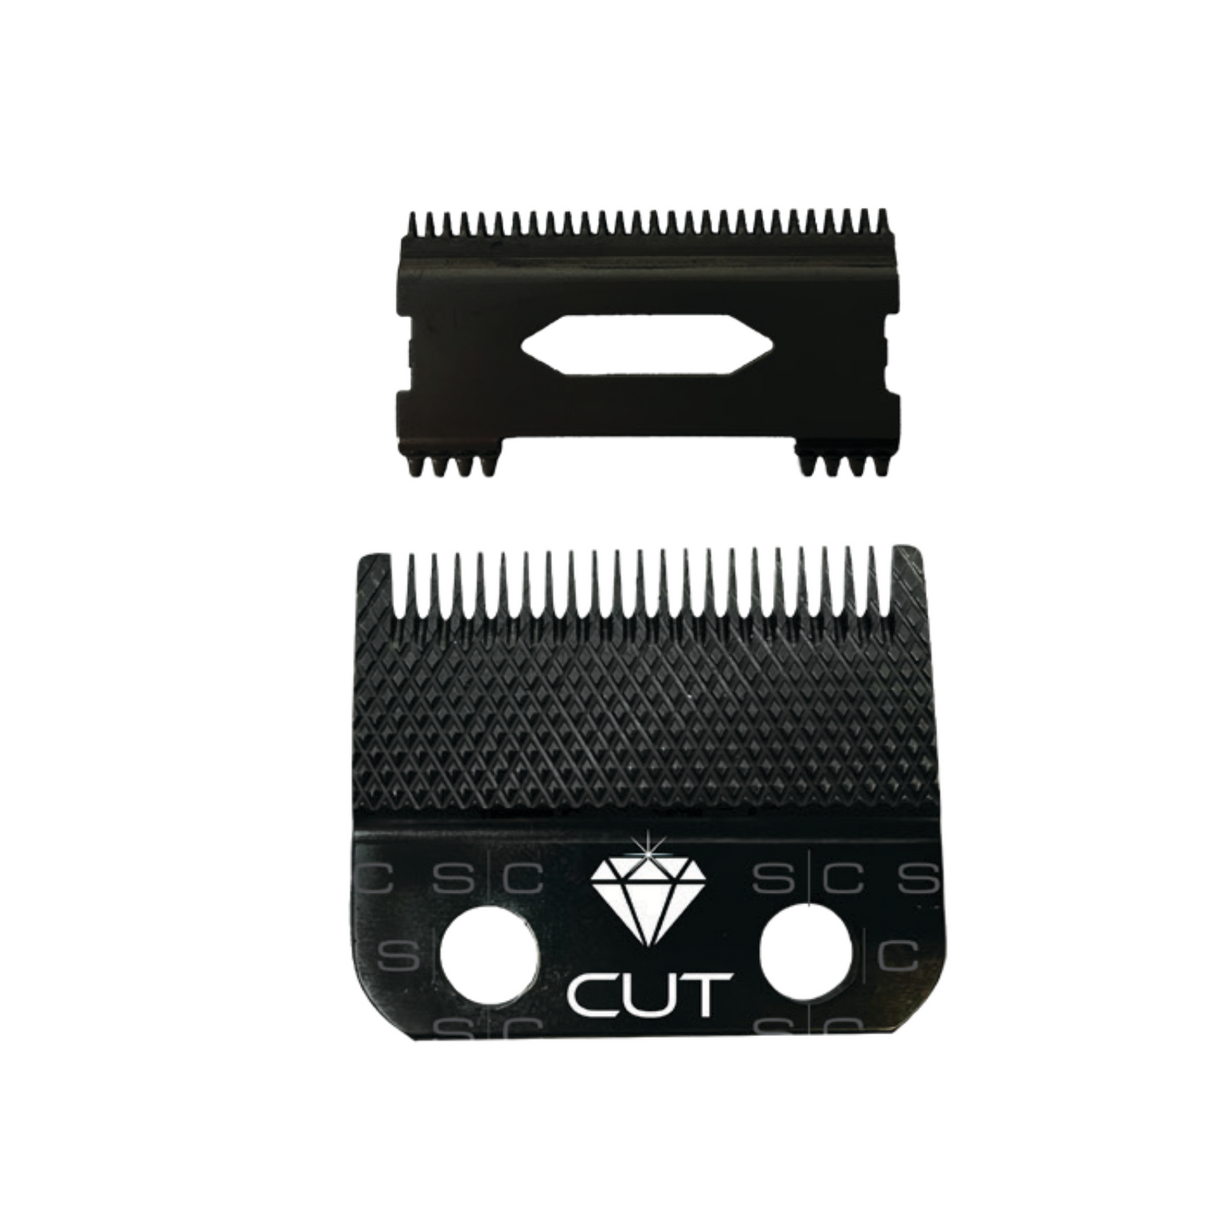 S|C Fixed Clipper Black Diamond Fade Blade with Black Diamond Shallow 2.0 Tooth Cutter